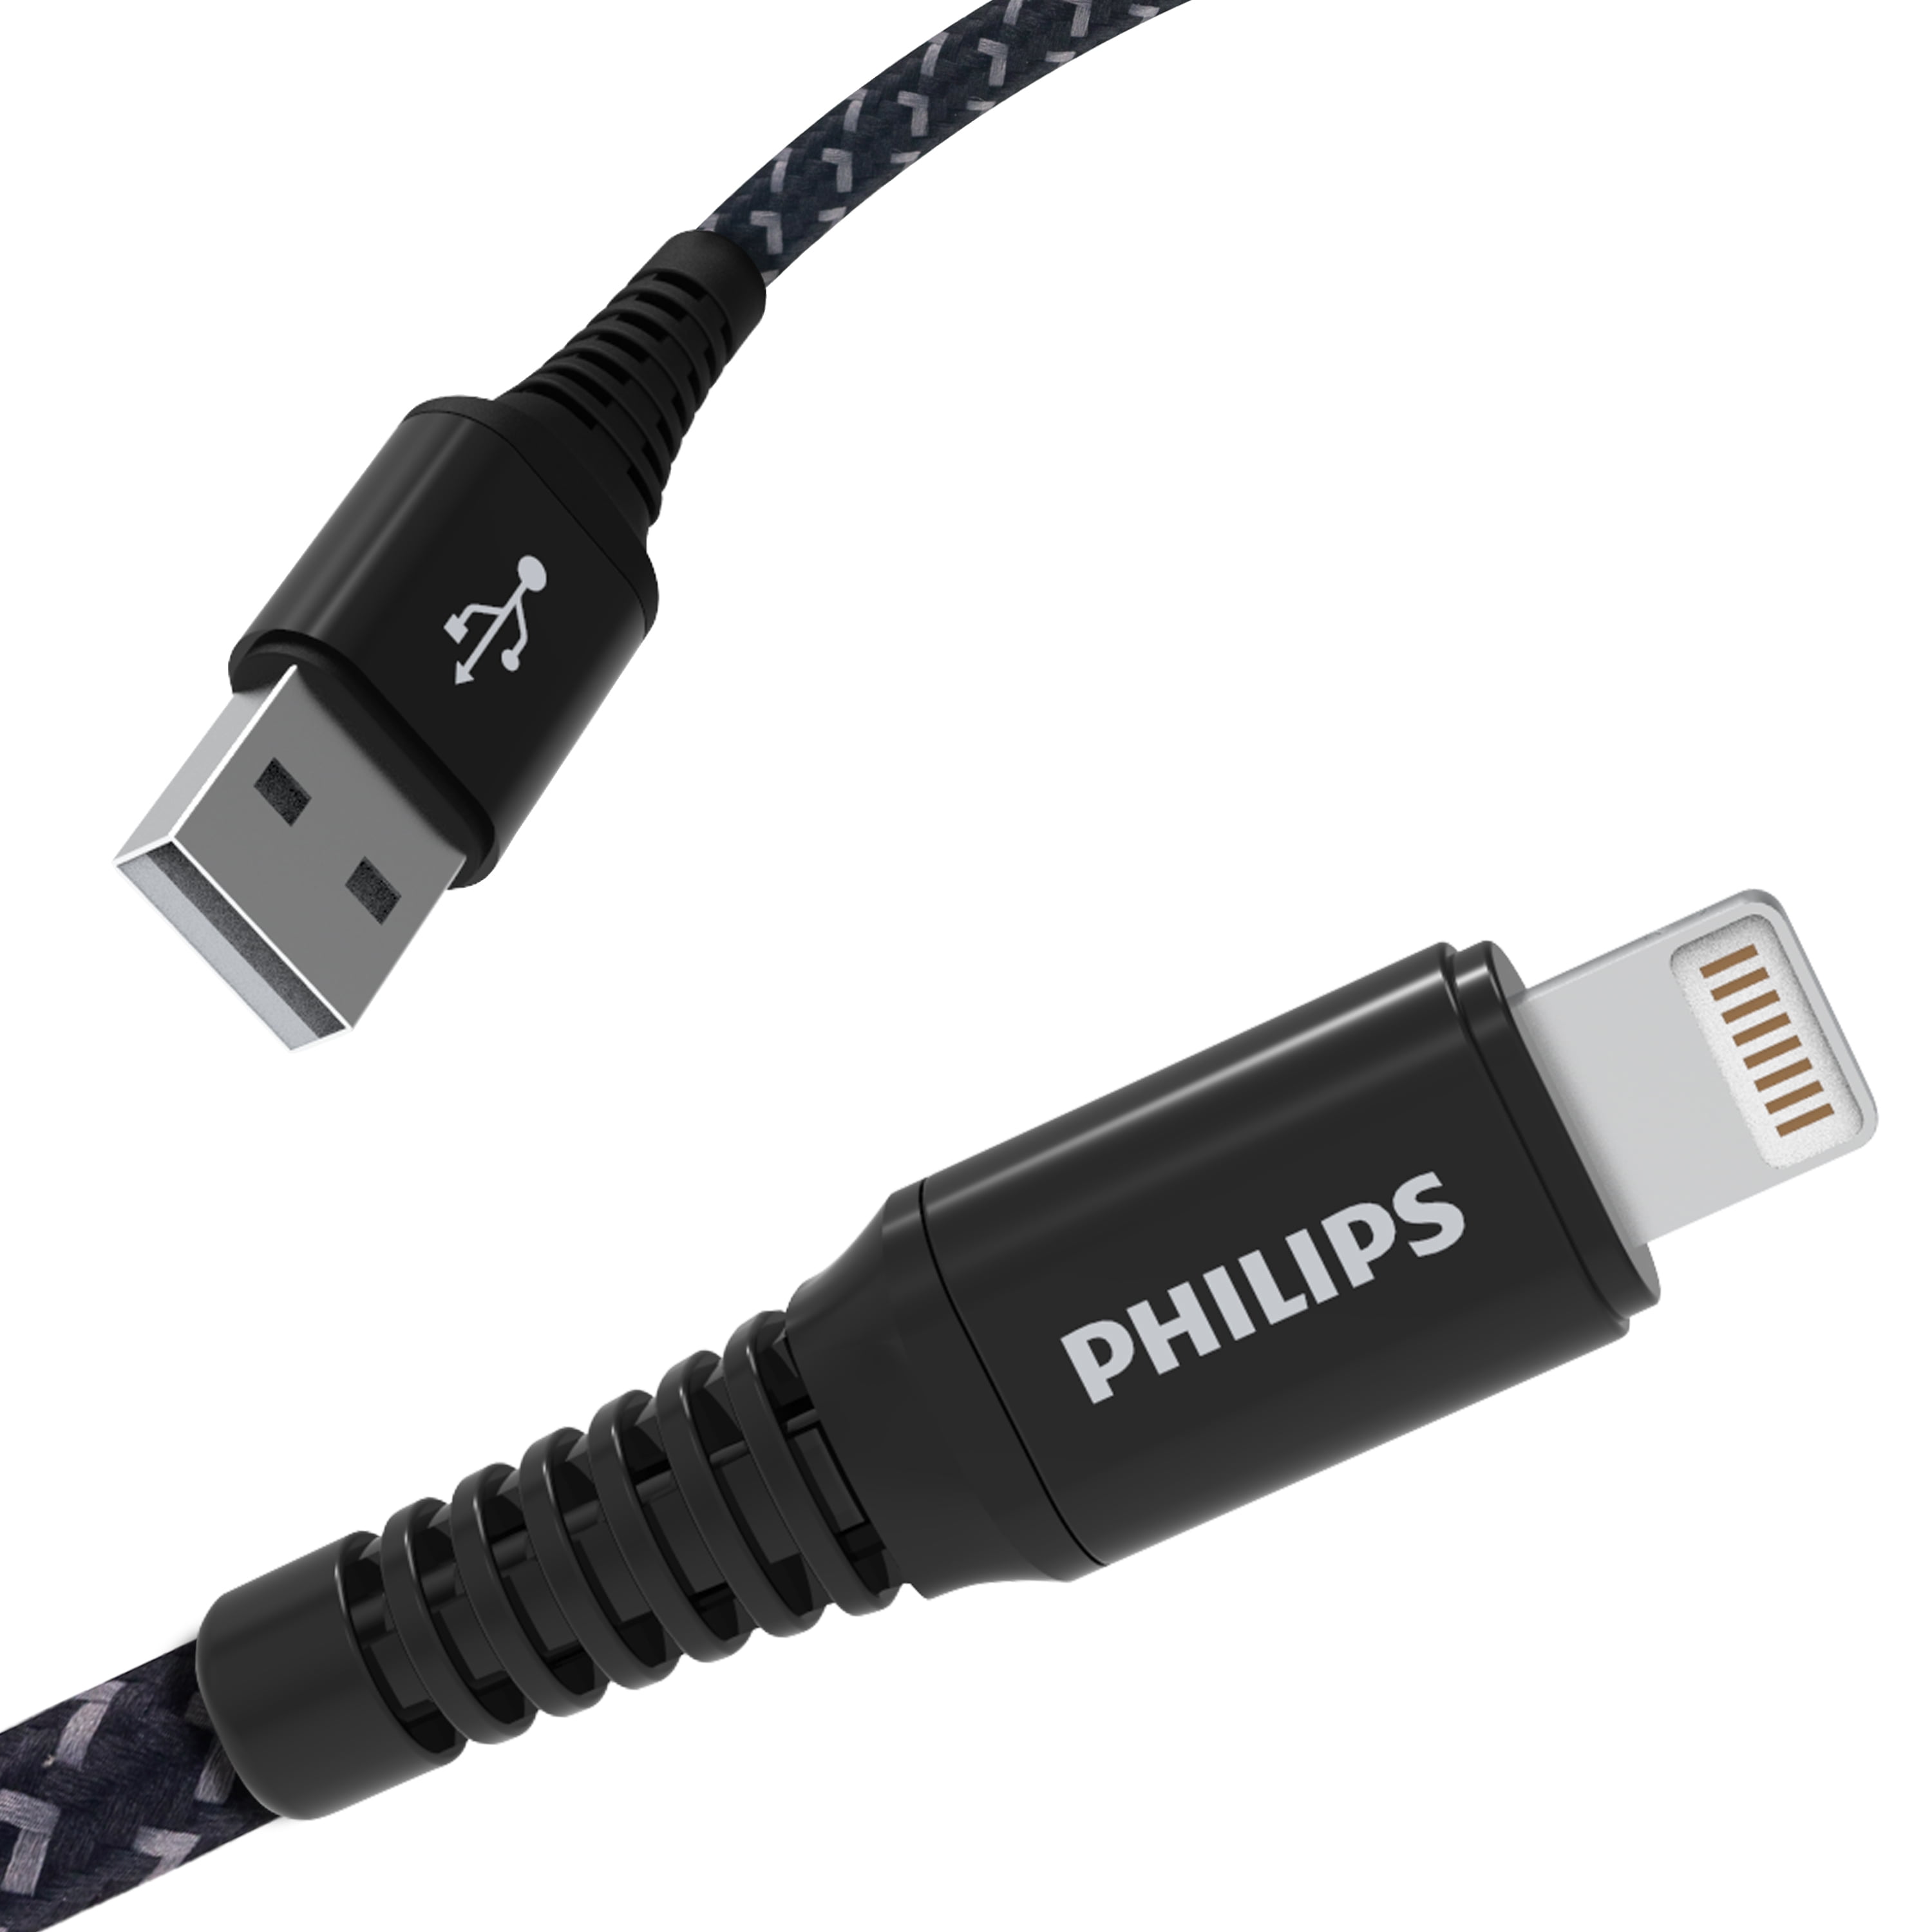 Dont Be A Richard 3 in 1 Multiple USB Stretch Charger Cord with Micro,Type C,iOS Connectors with Cell Phone Tablets More 